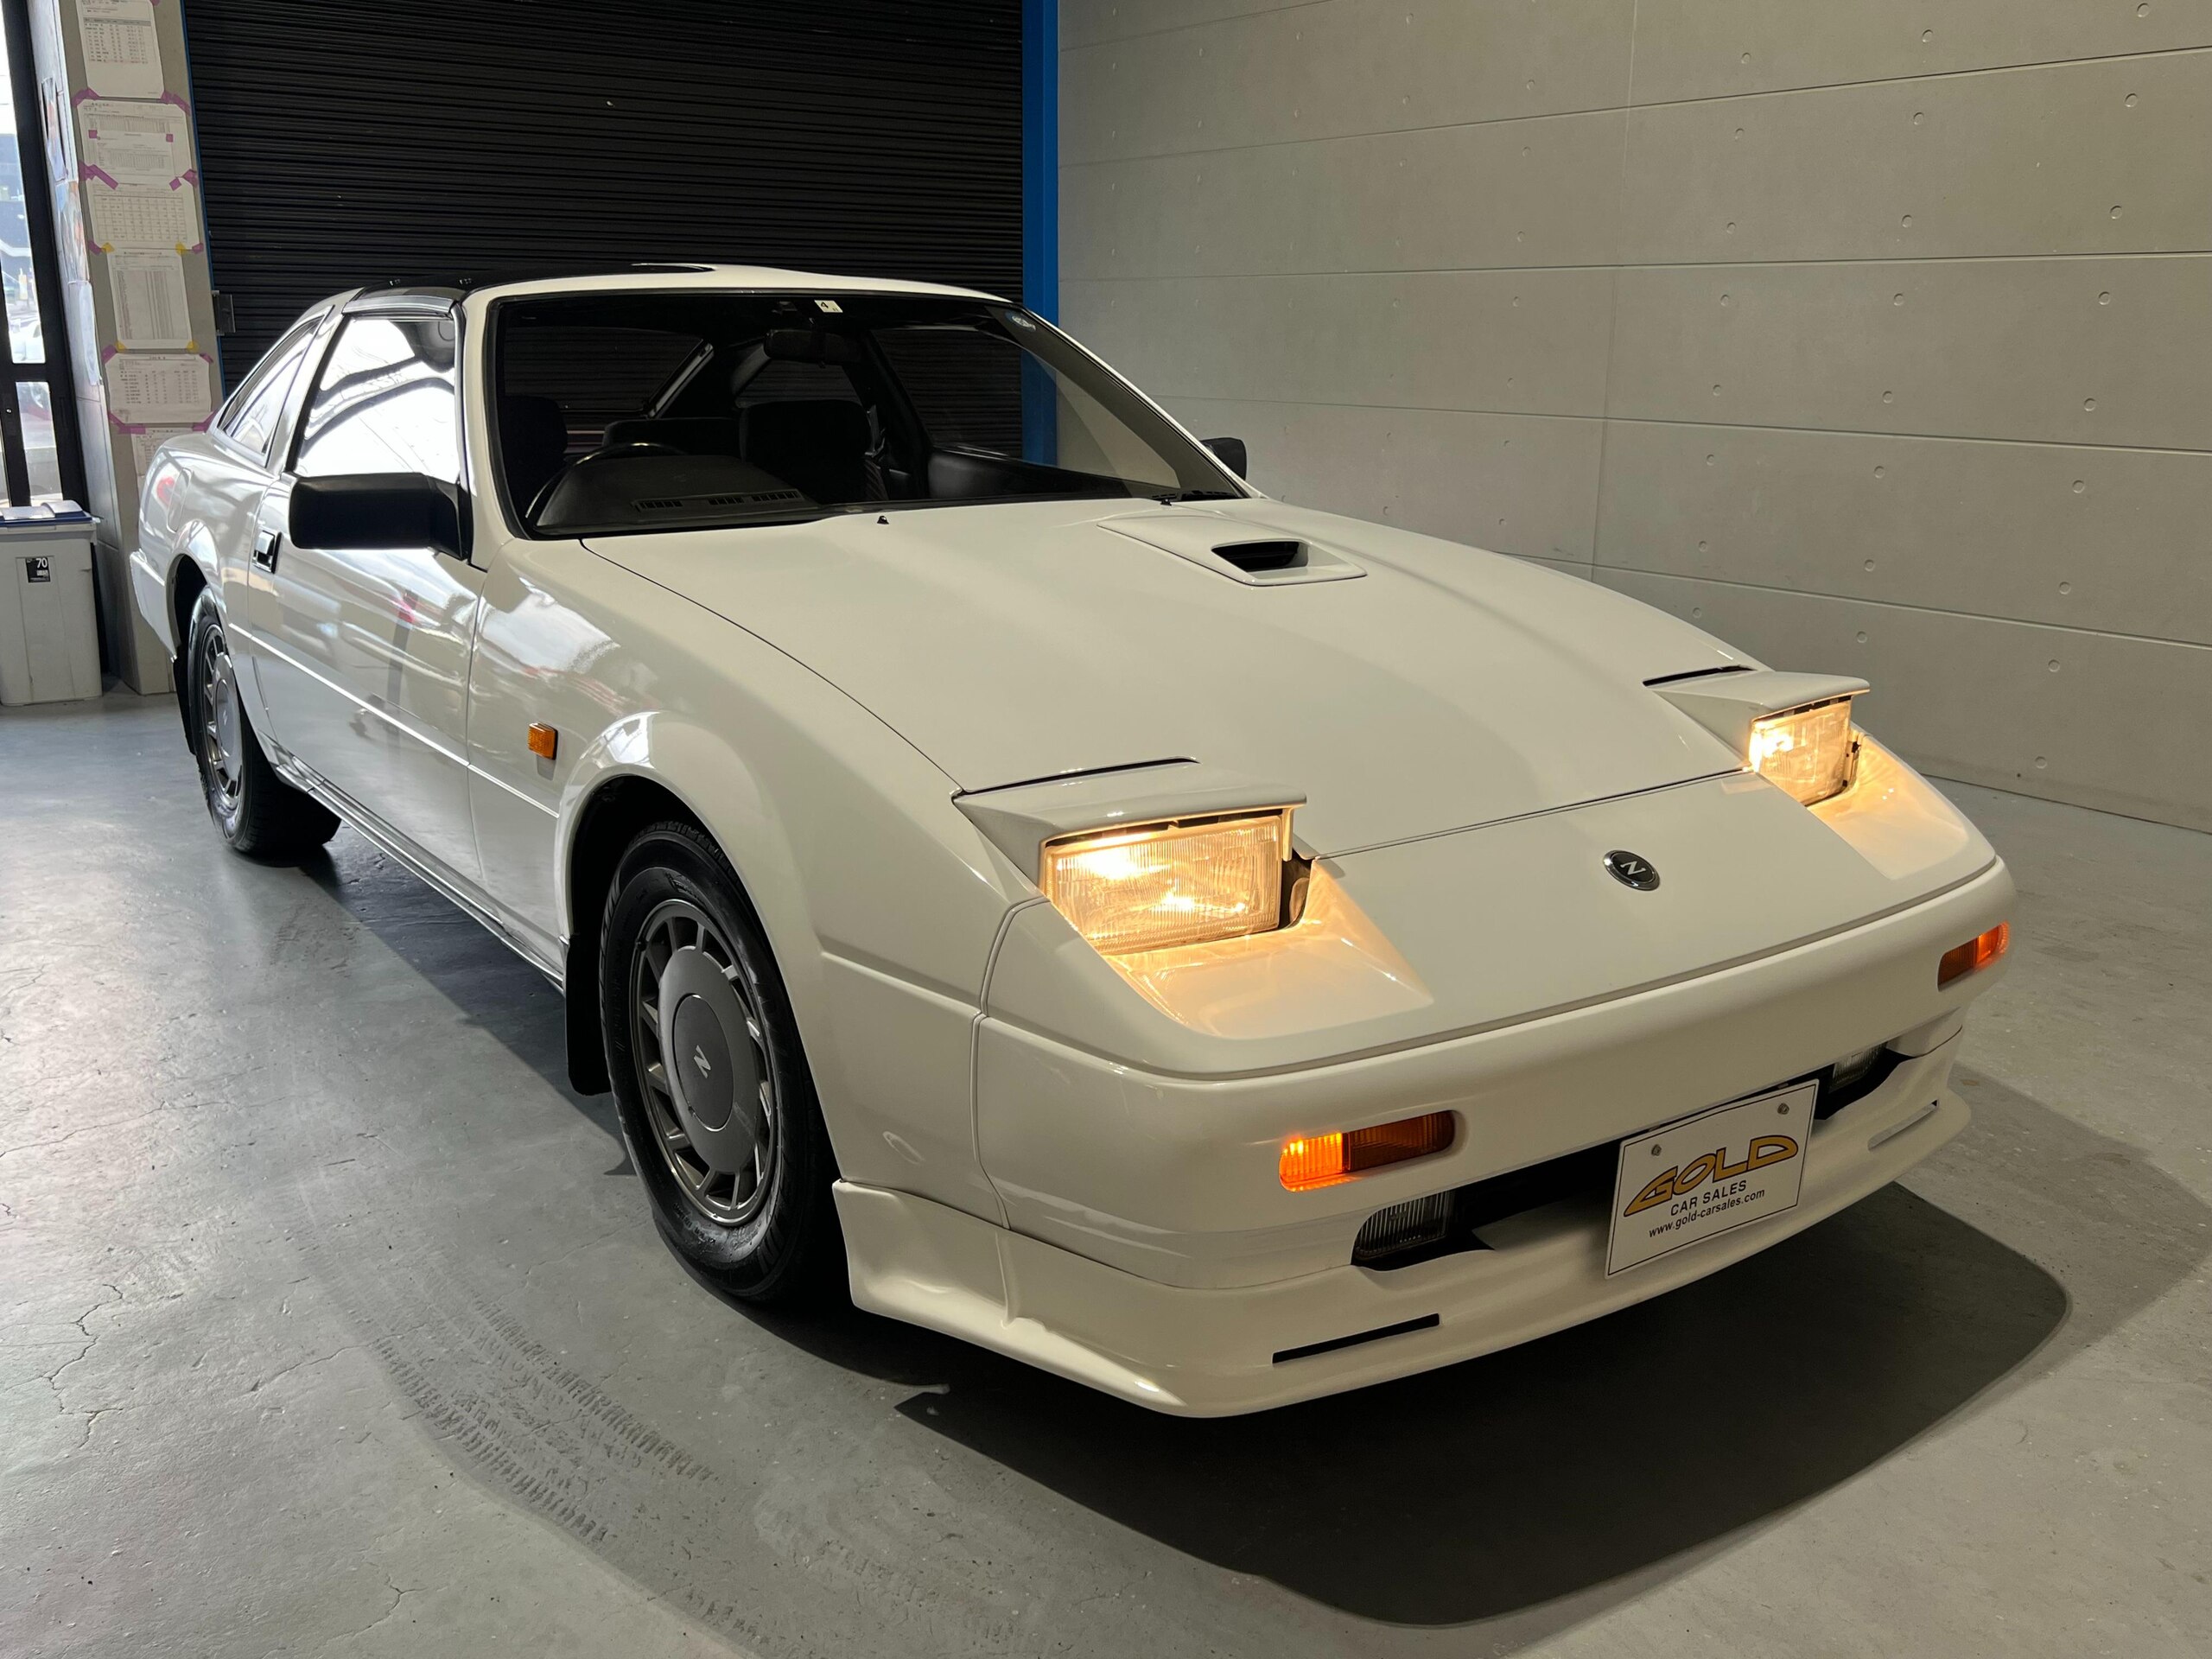 Used NISSAN FAIRLADY Z 1988 CFJ7818731 in good condition for 